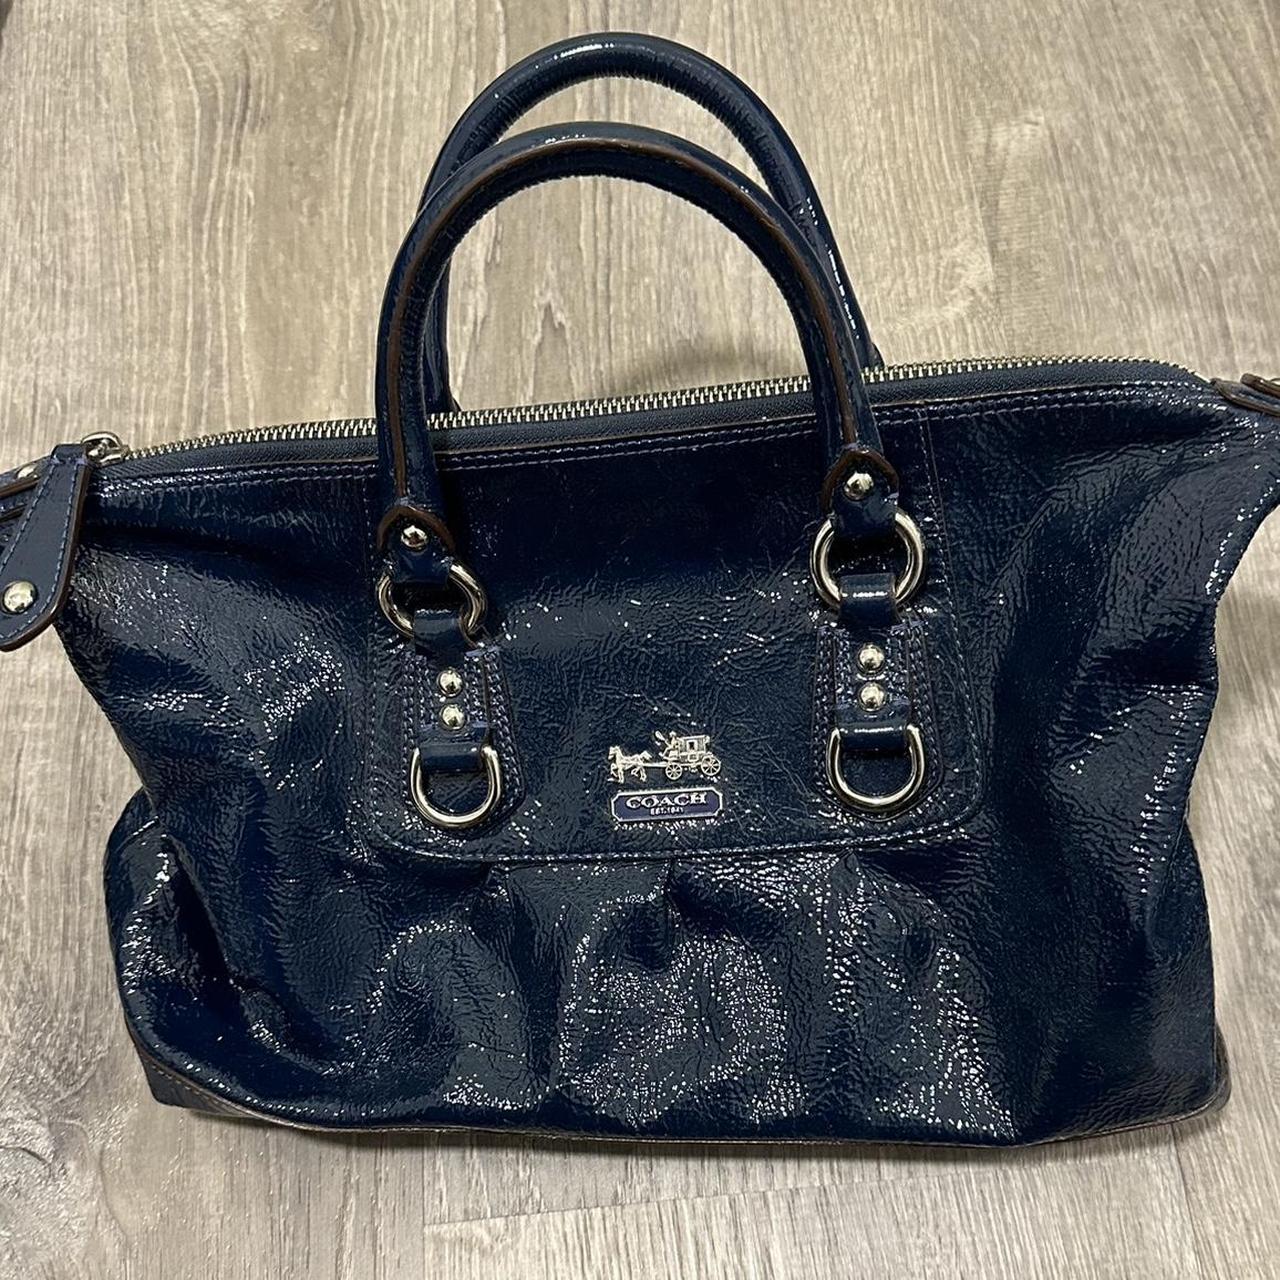 Coach | Bags | Coach Legacy Leather Navy Blue Candace Carryall Tote  Shoulder Bag 2239 | Poshmark